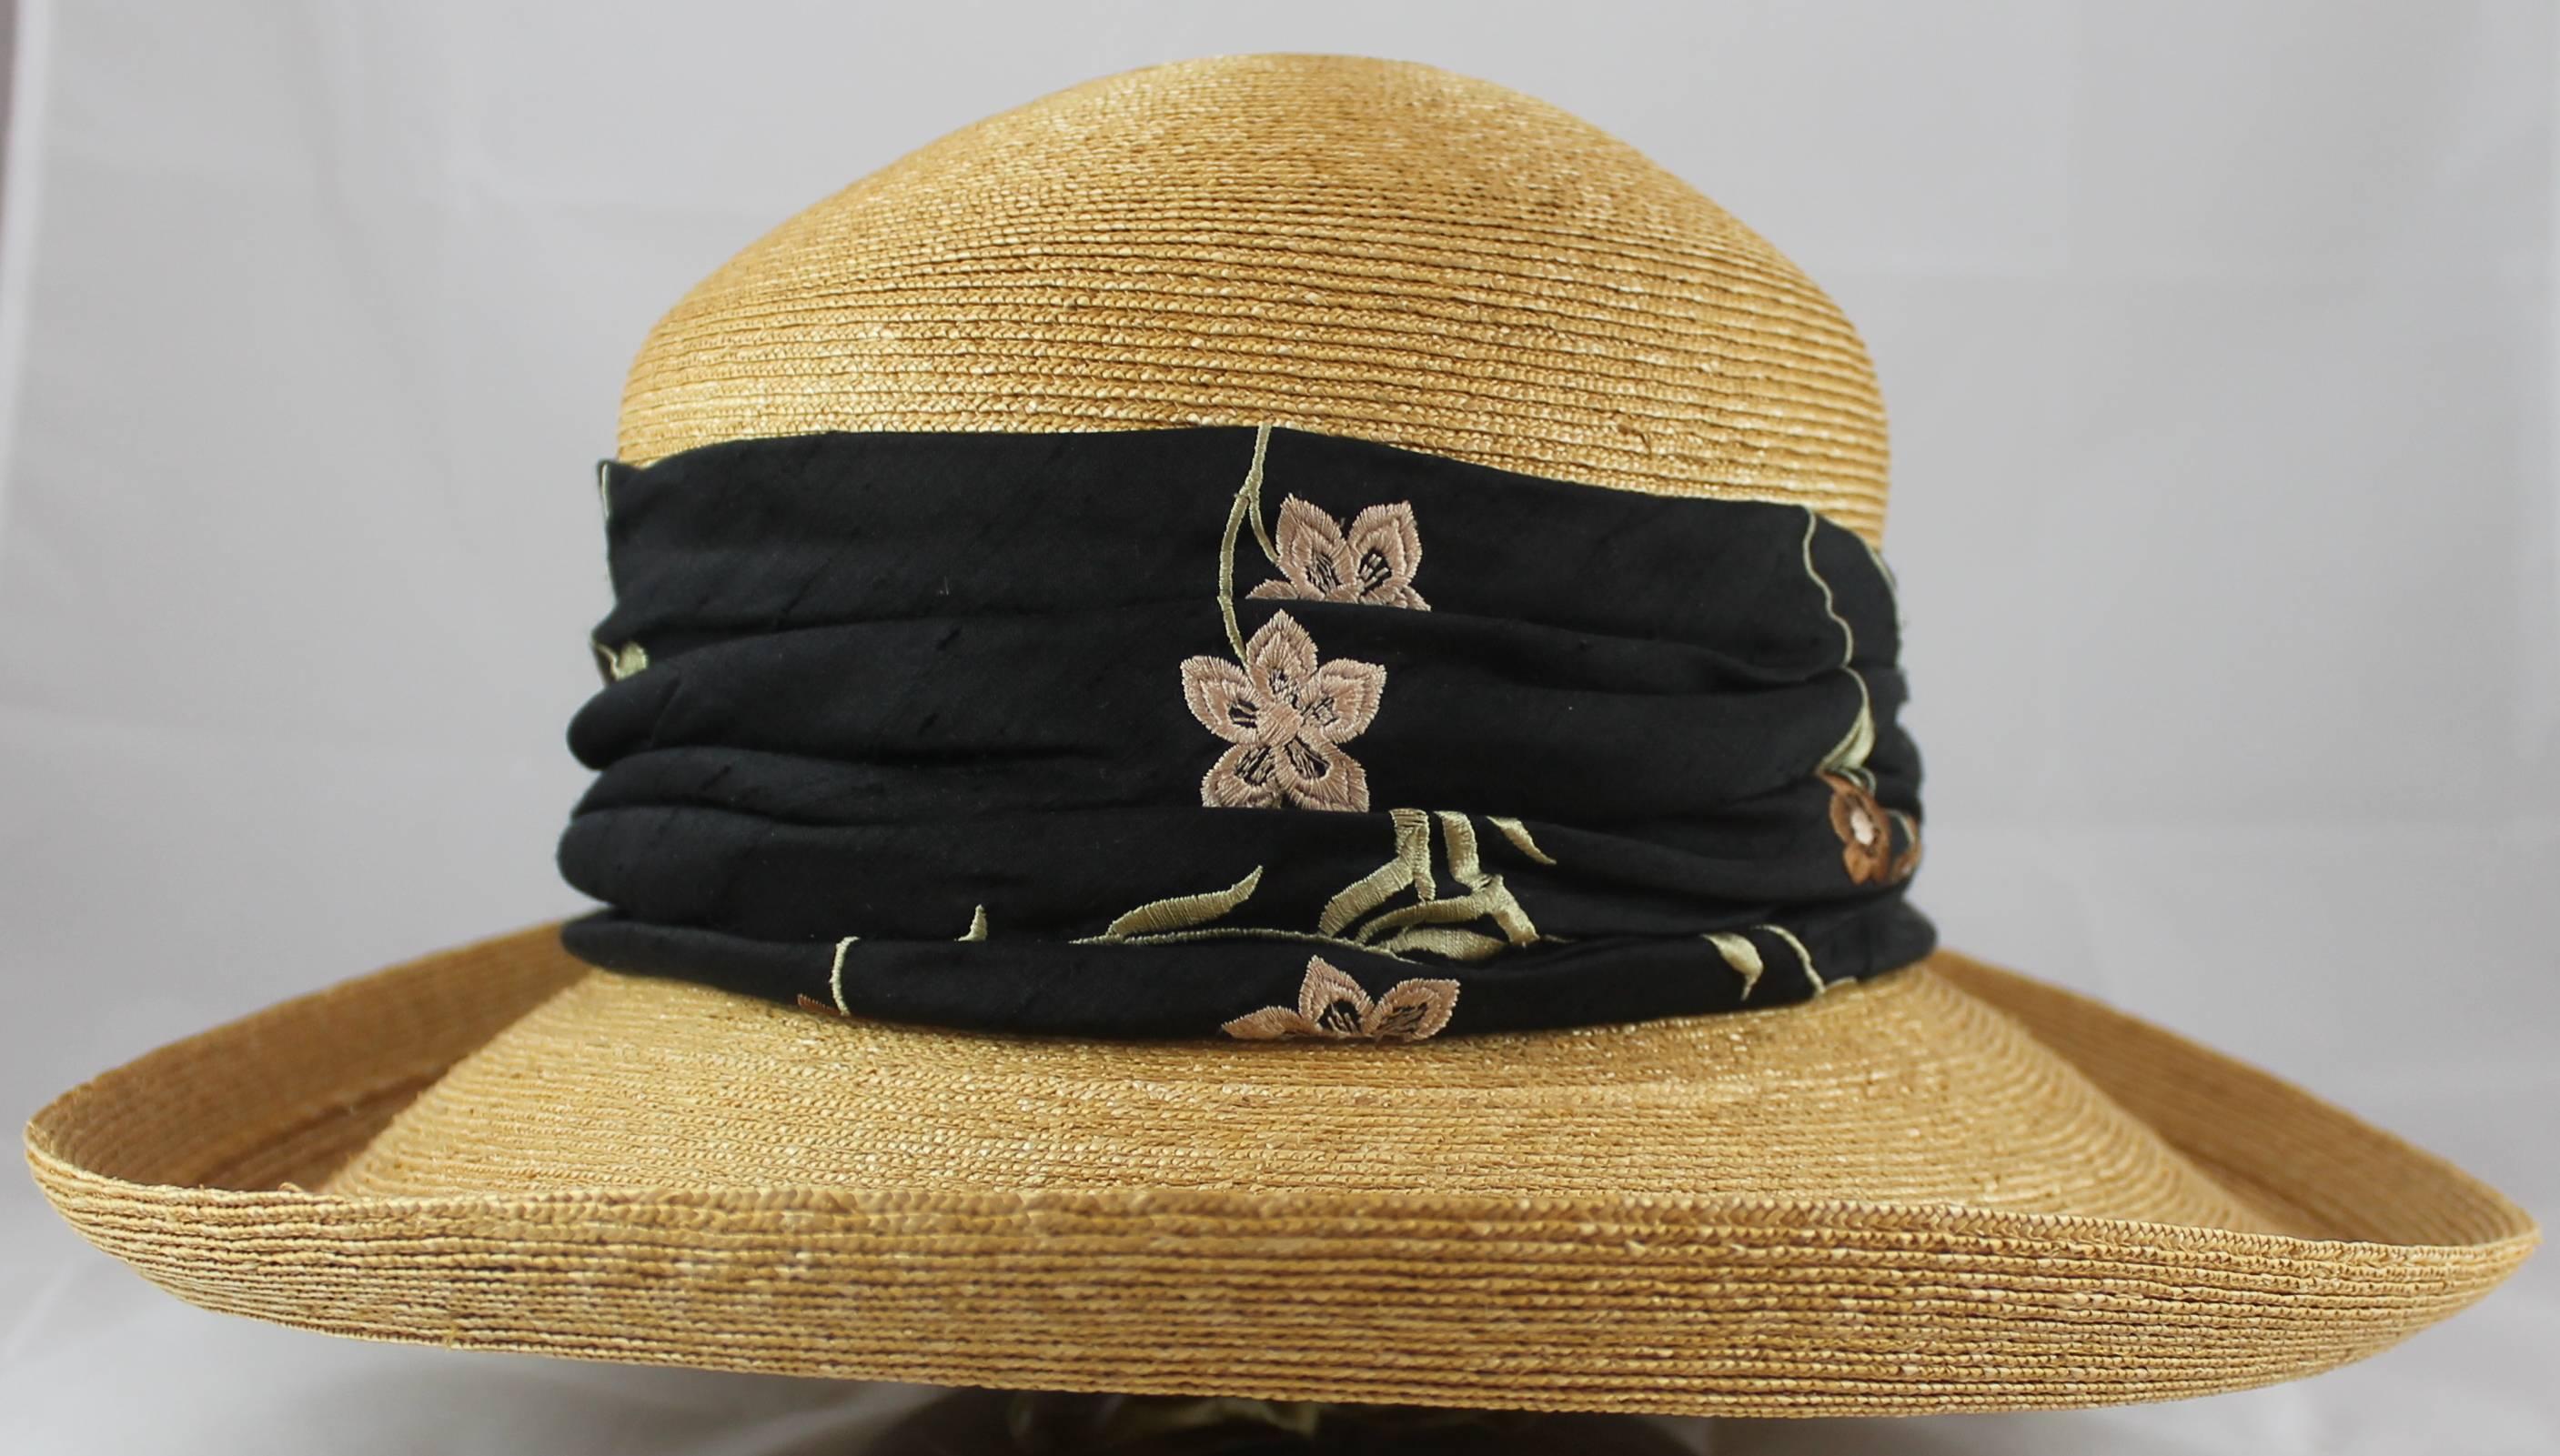 Beige Suzanne Couture Millinery Tan Straw Hat with Black Floral Ribbon 